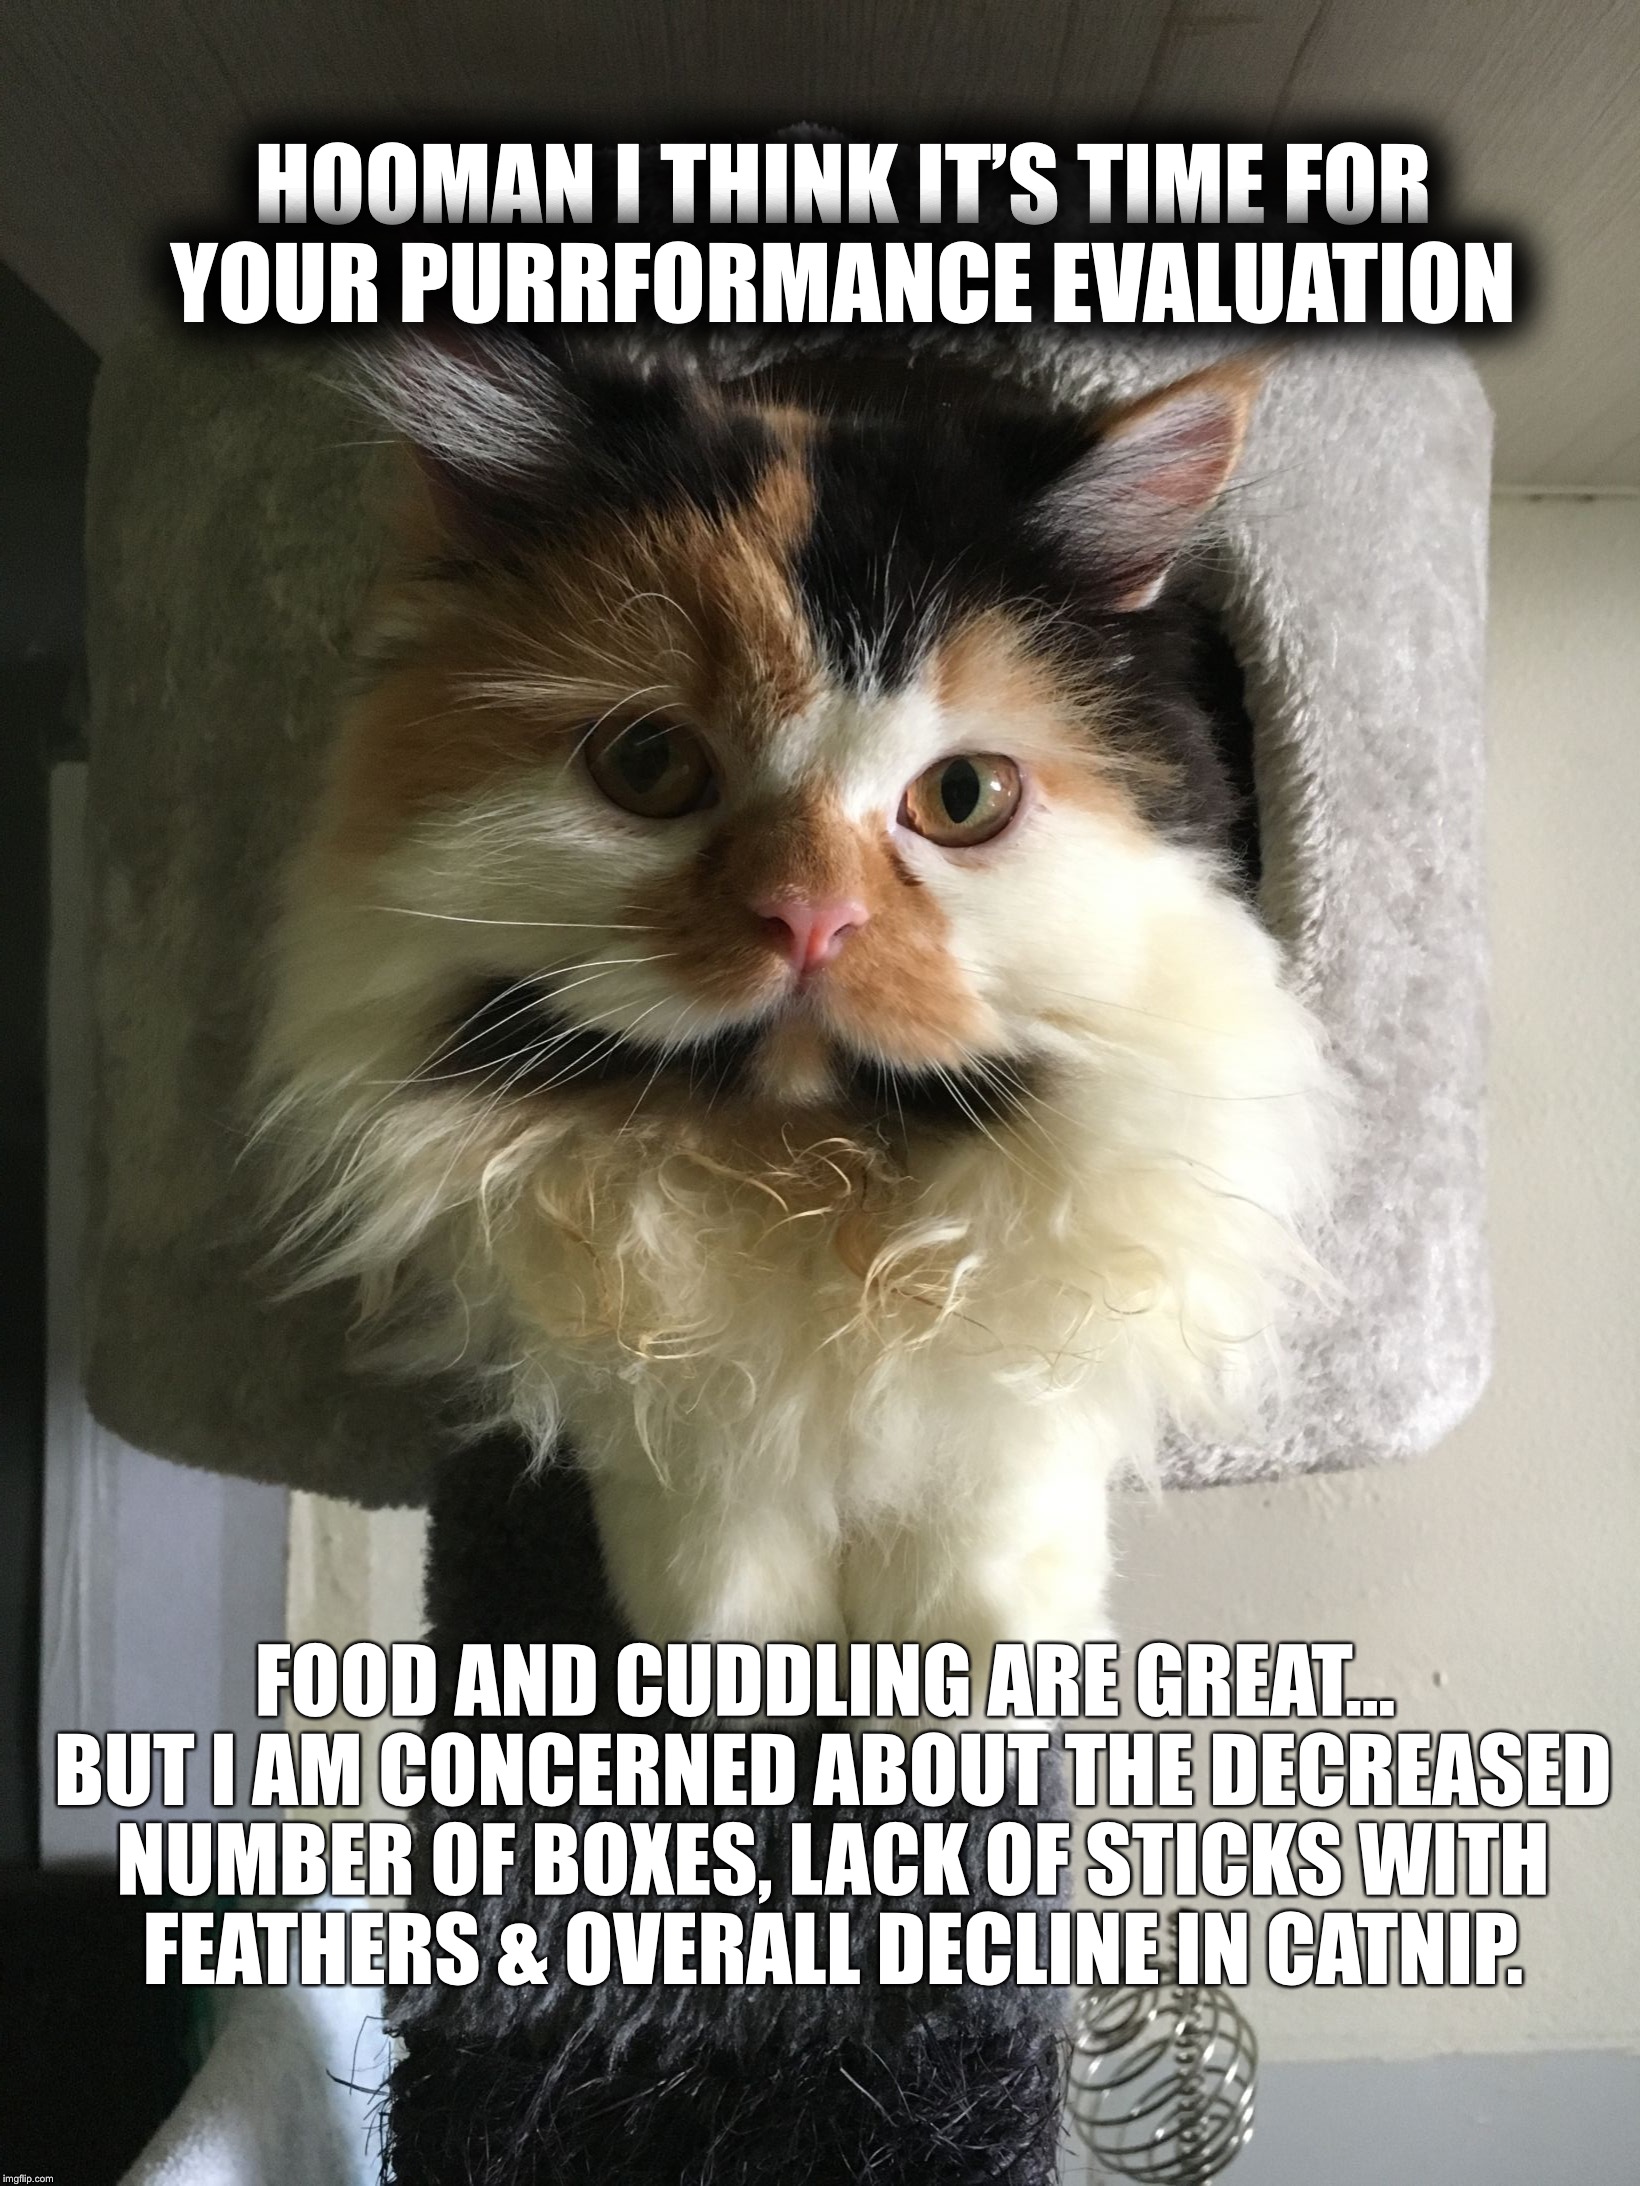 HOOMAN I THINK IT’S TIME FOR YOUR PURRFORMANCE EVALUATION; FOOD AND CUDDLING ARE GREAT... BUT I AM CONCERNED ABOUT THE DECREASED NUMBER OF BOXES, LACK OF STICKS WITH FEATHERS & OVERALL DECLINE IN CATNIP. | image tagged in cat evaluation | made w/ Imgflip meme maker